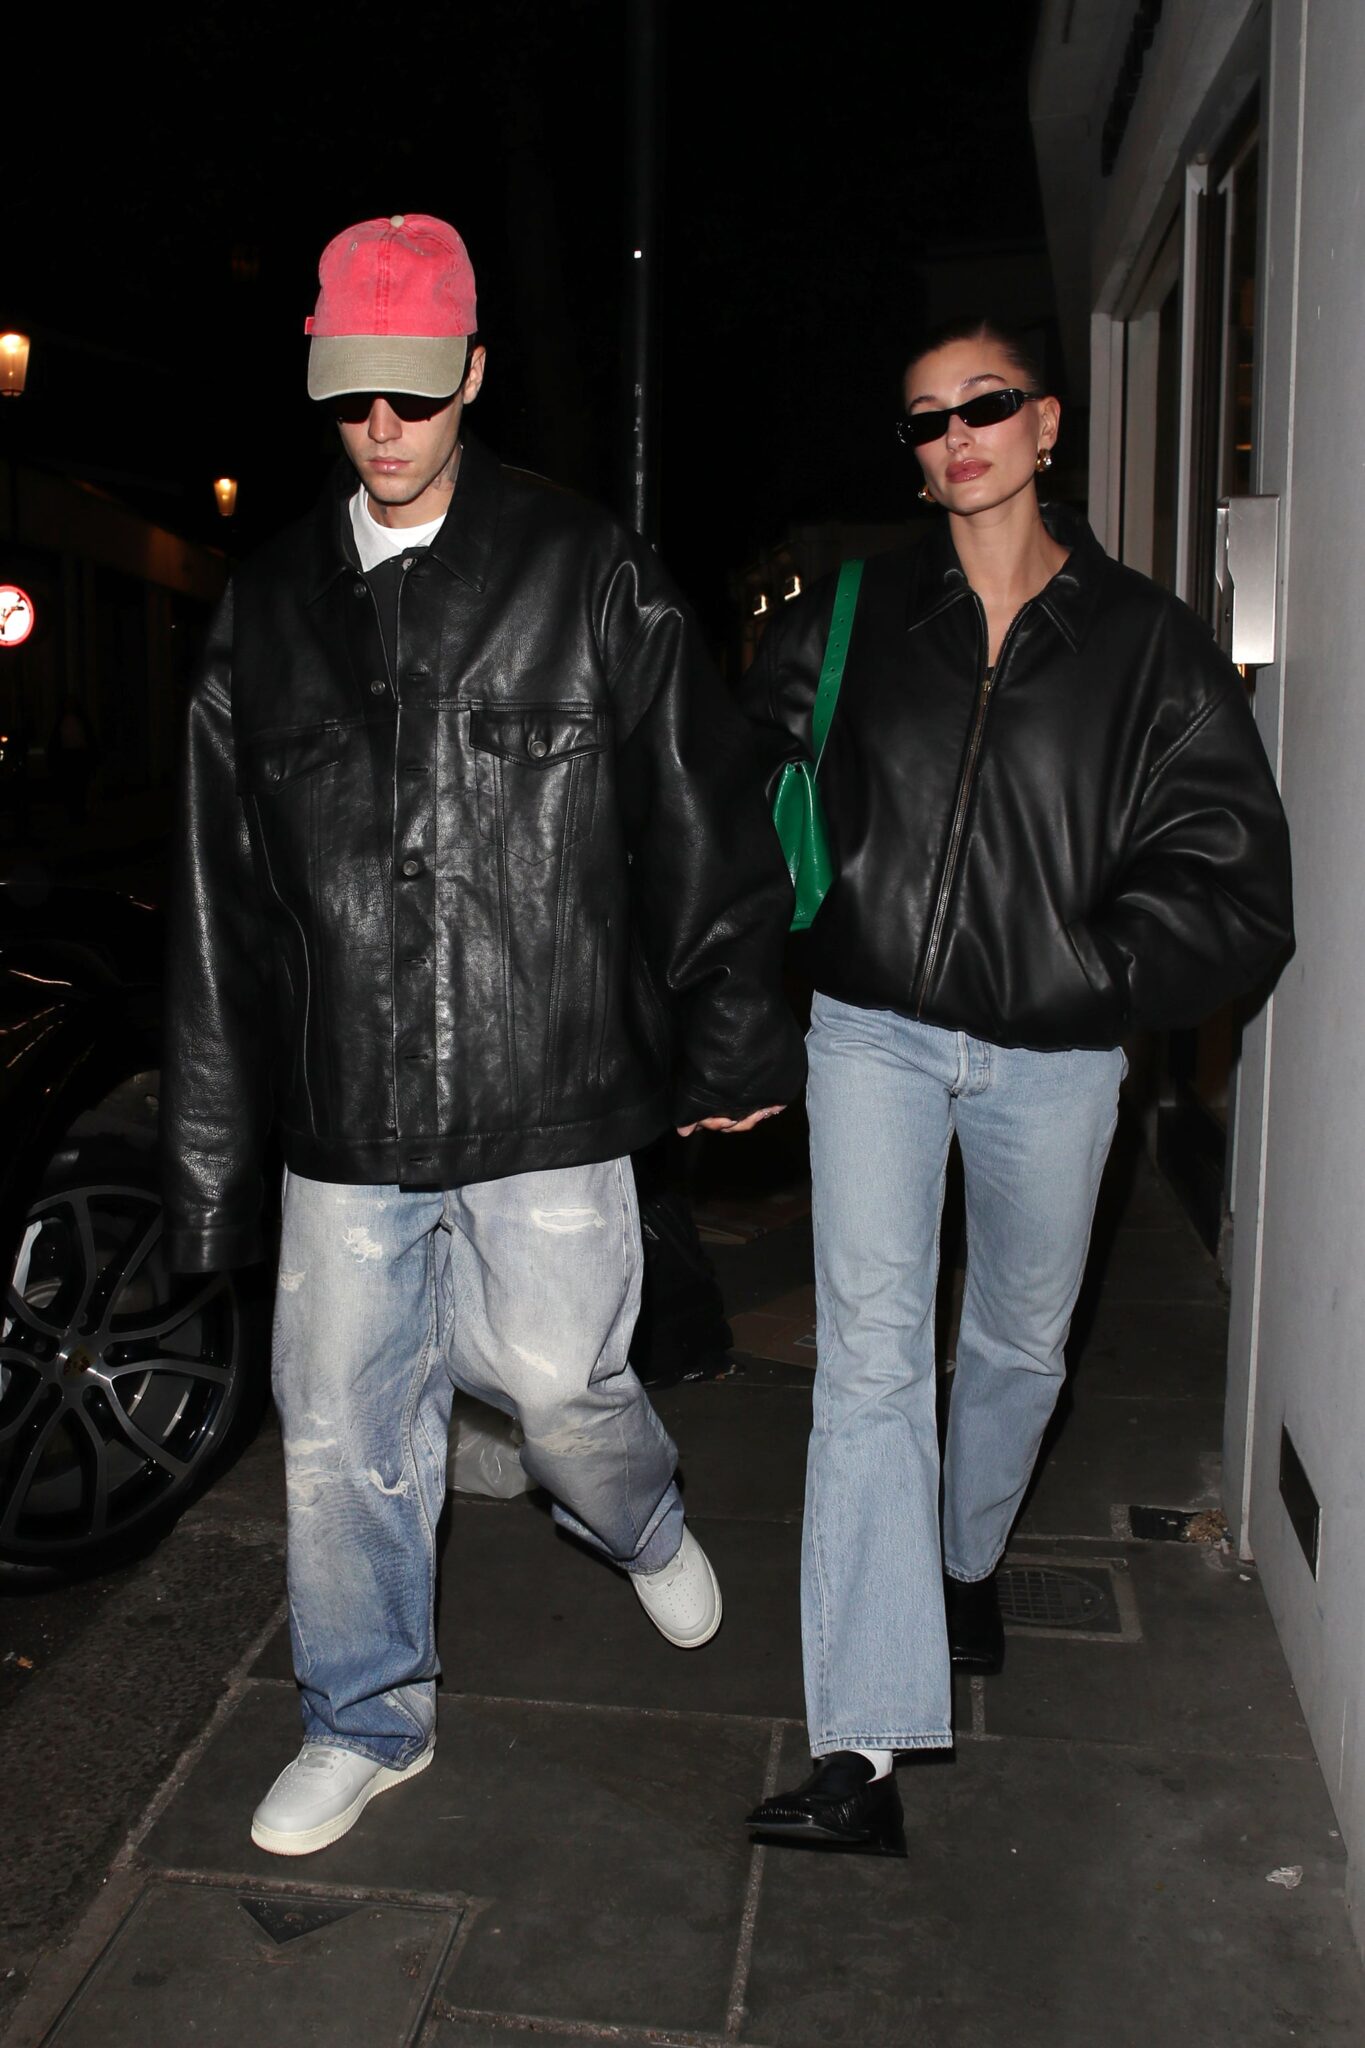 Hailey and Justin Bieber Matching Leather Jackets and Jeans - Fashnfly